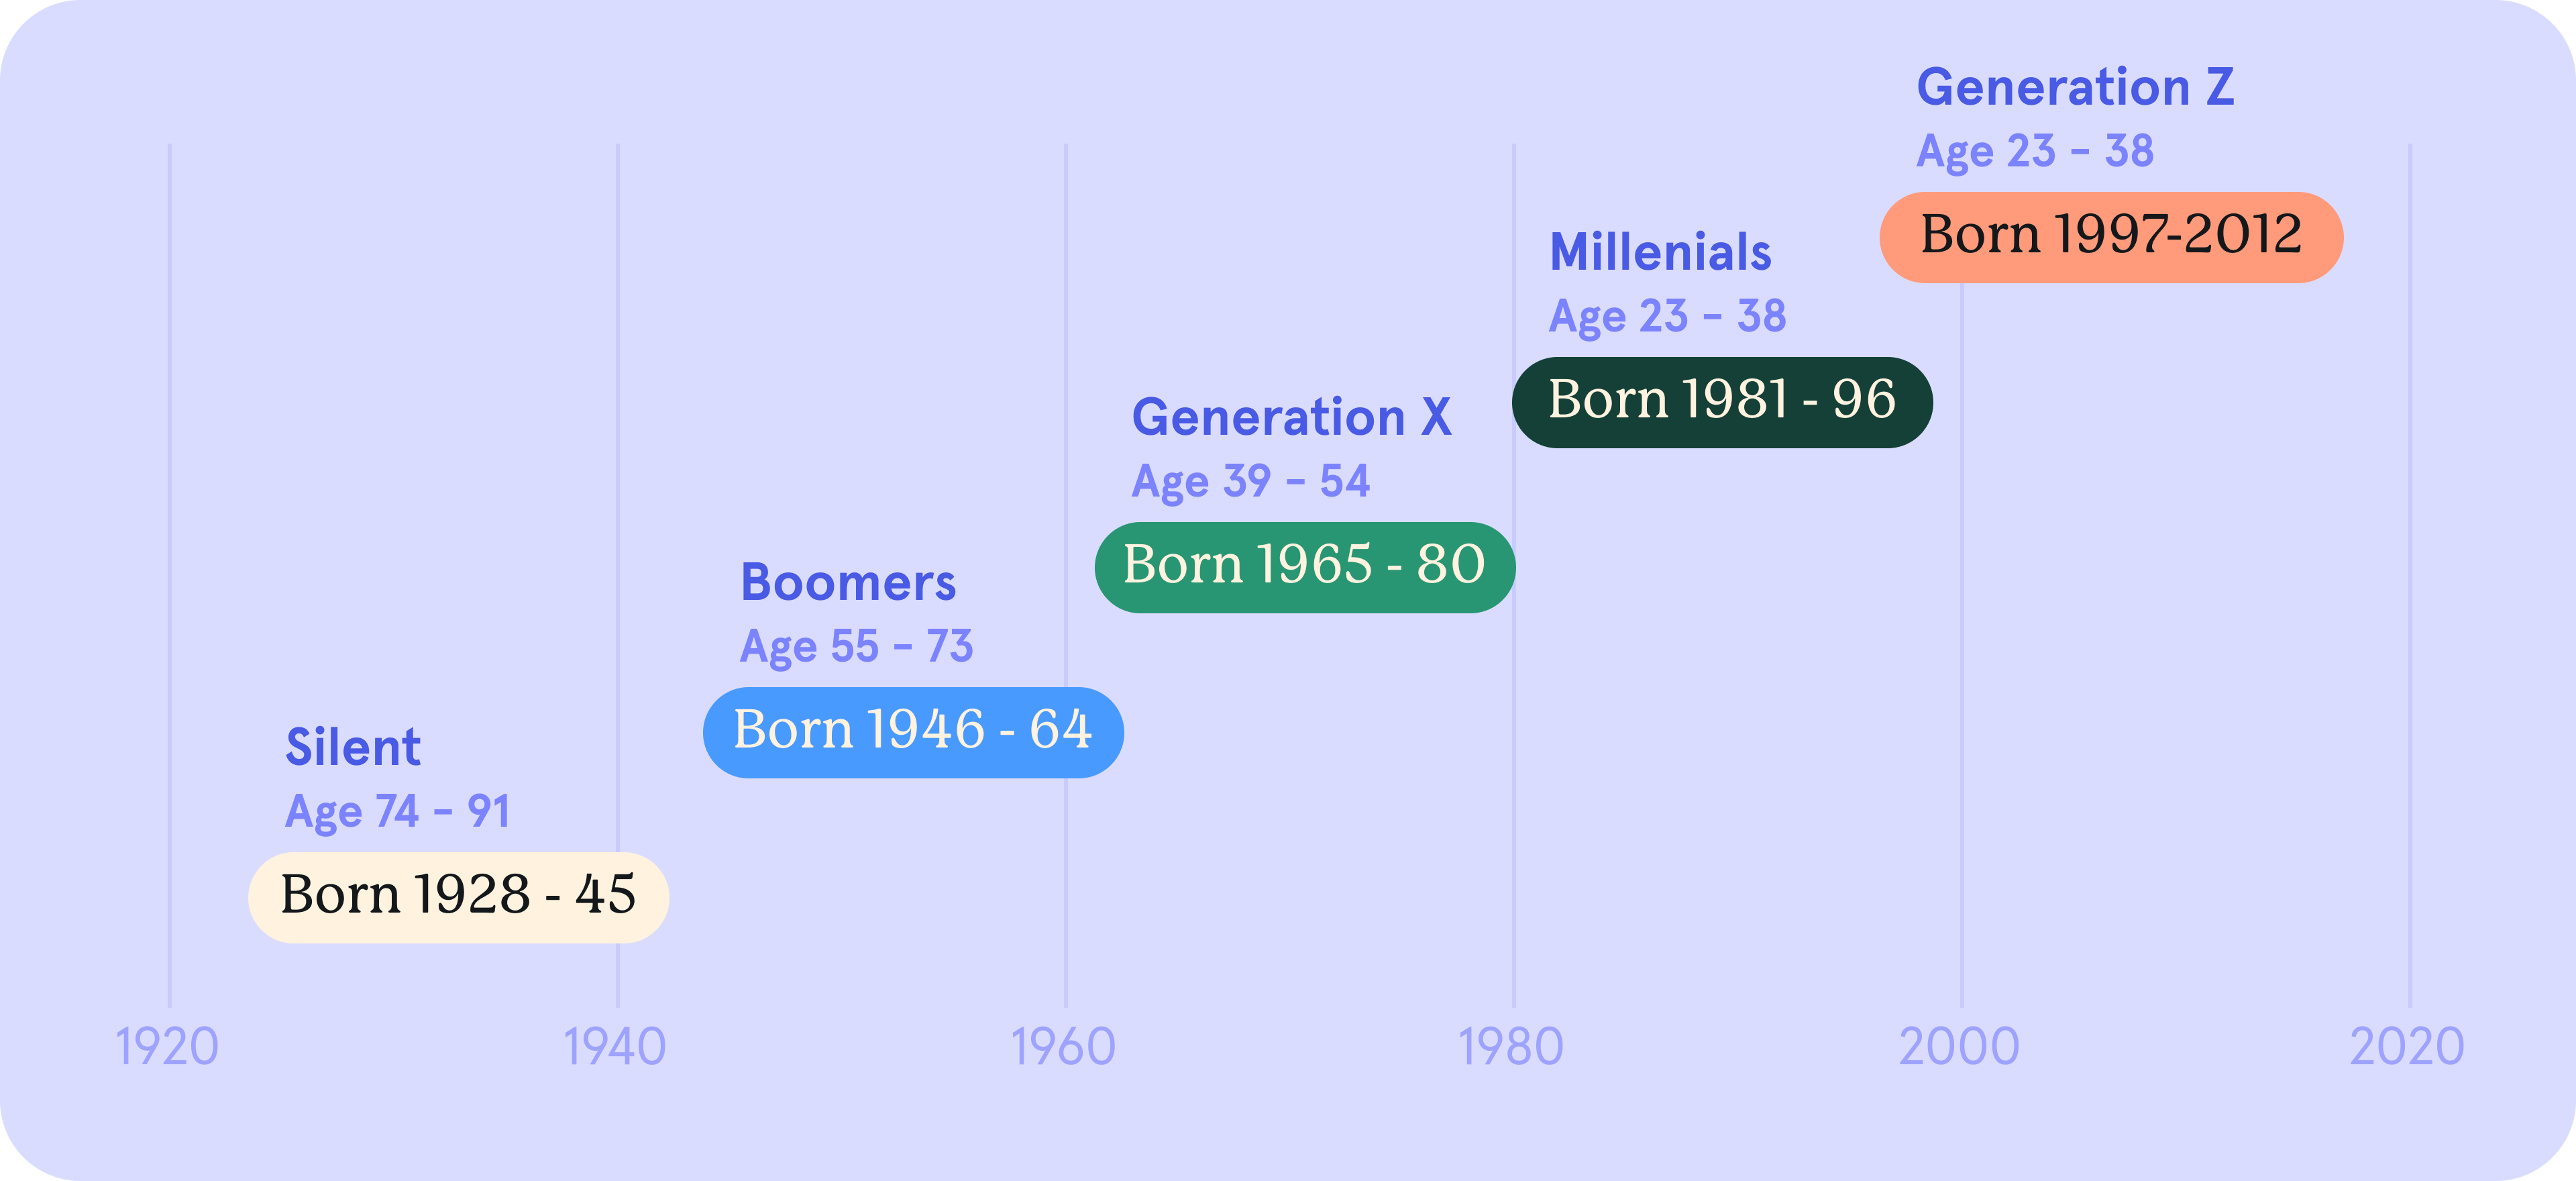 A graph depicting all the different generations and their age ranges